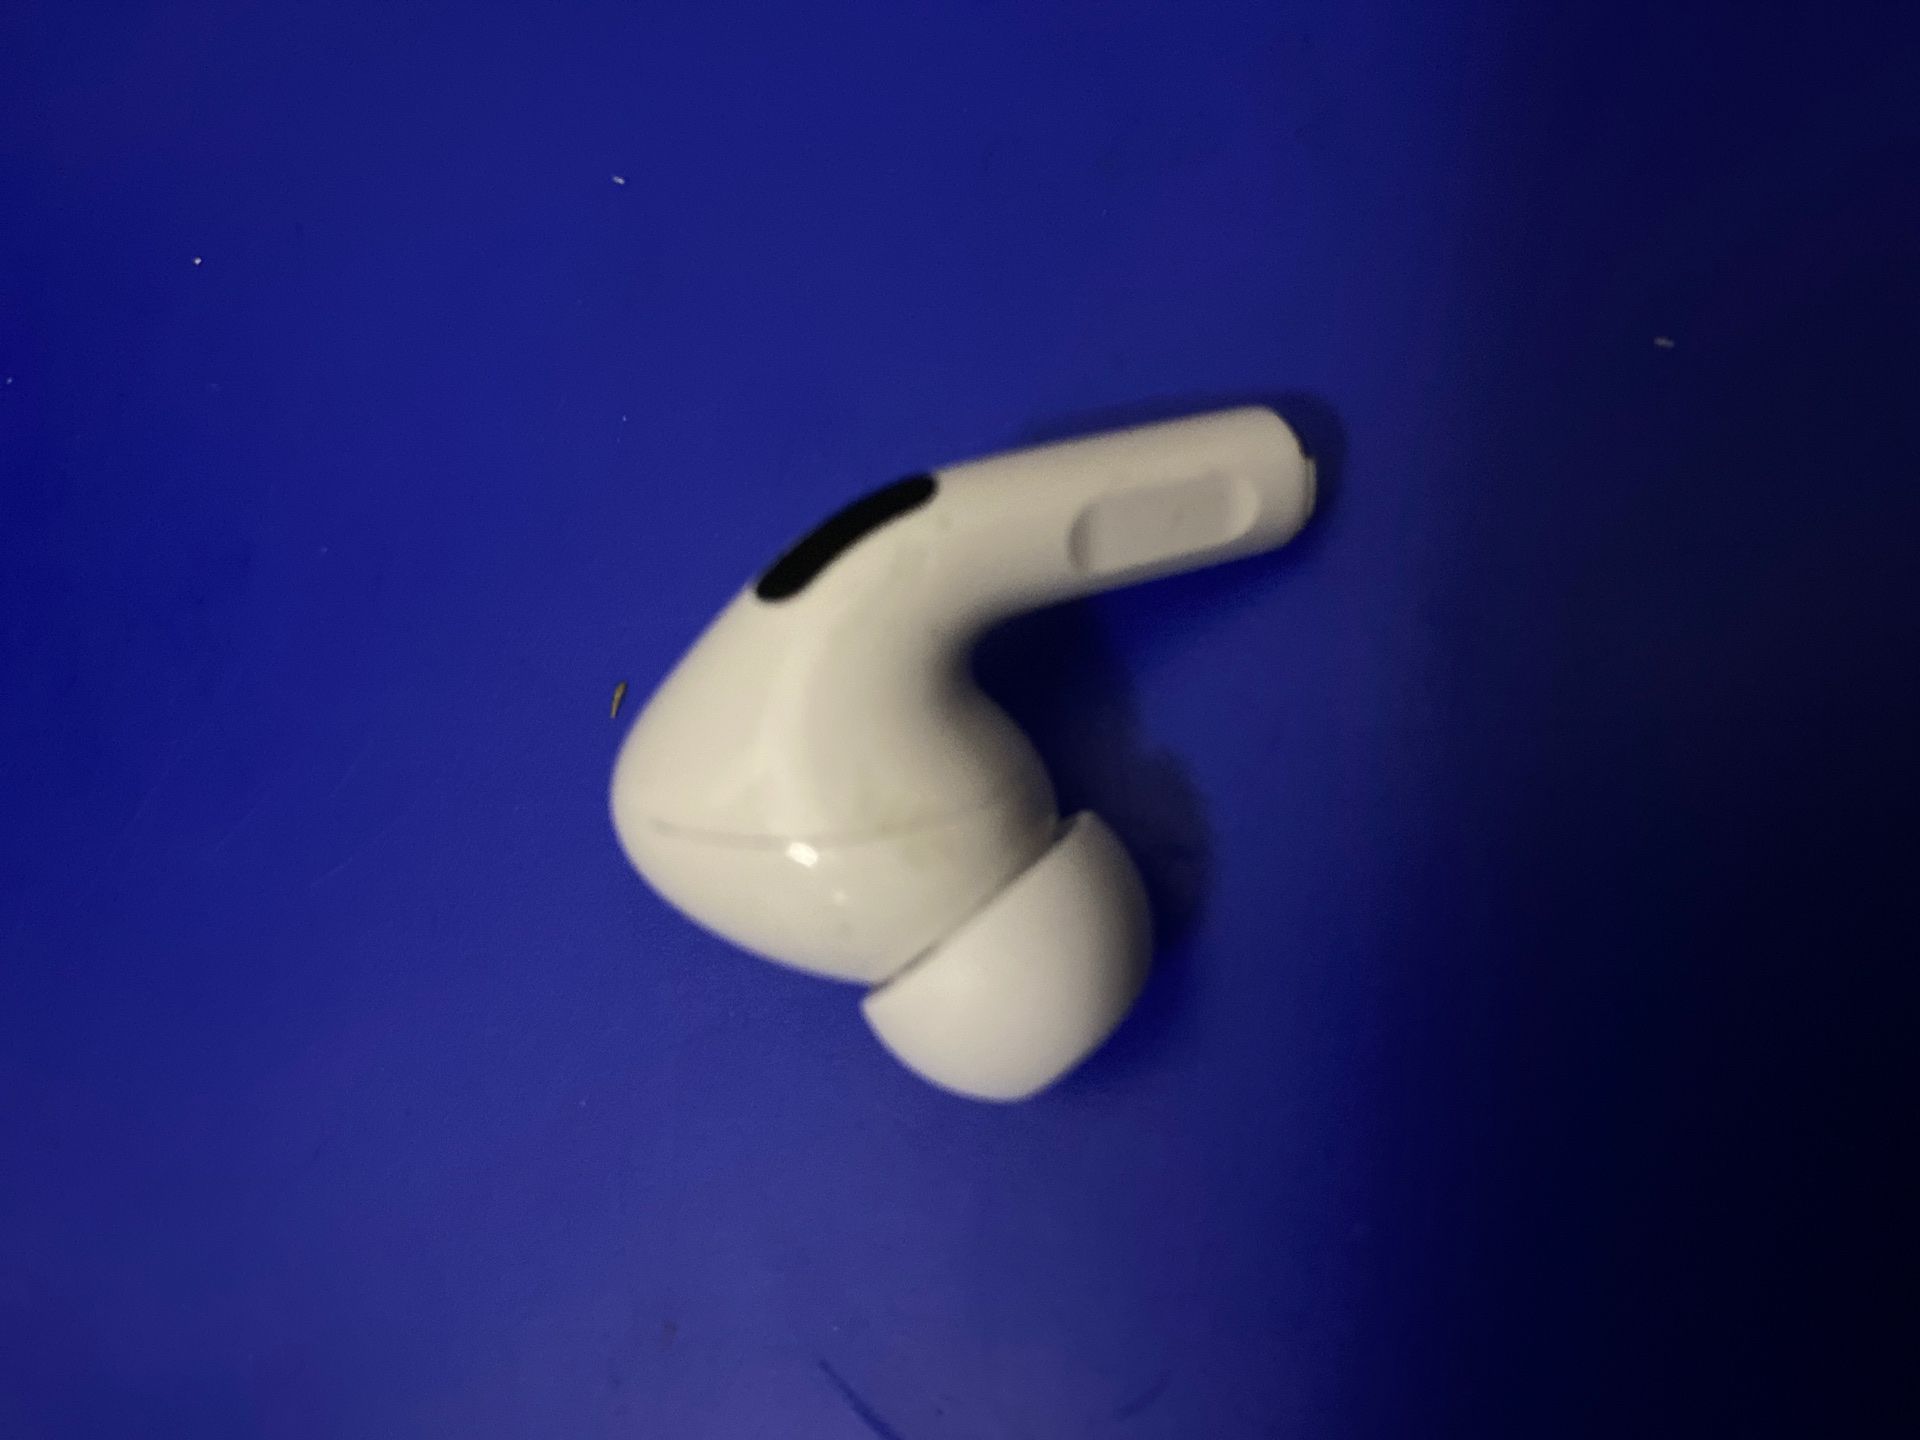 AirPod pro left side only